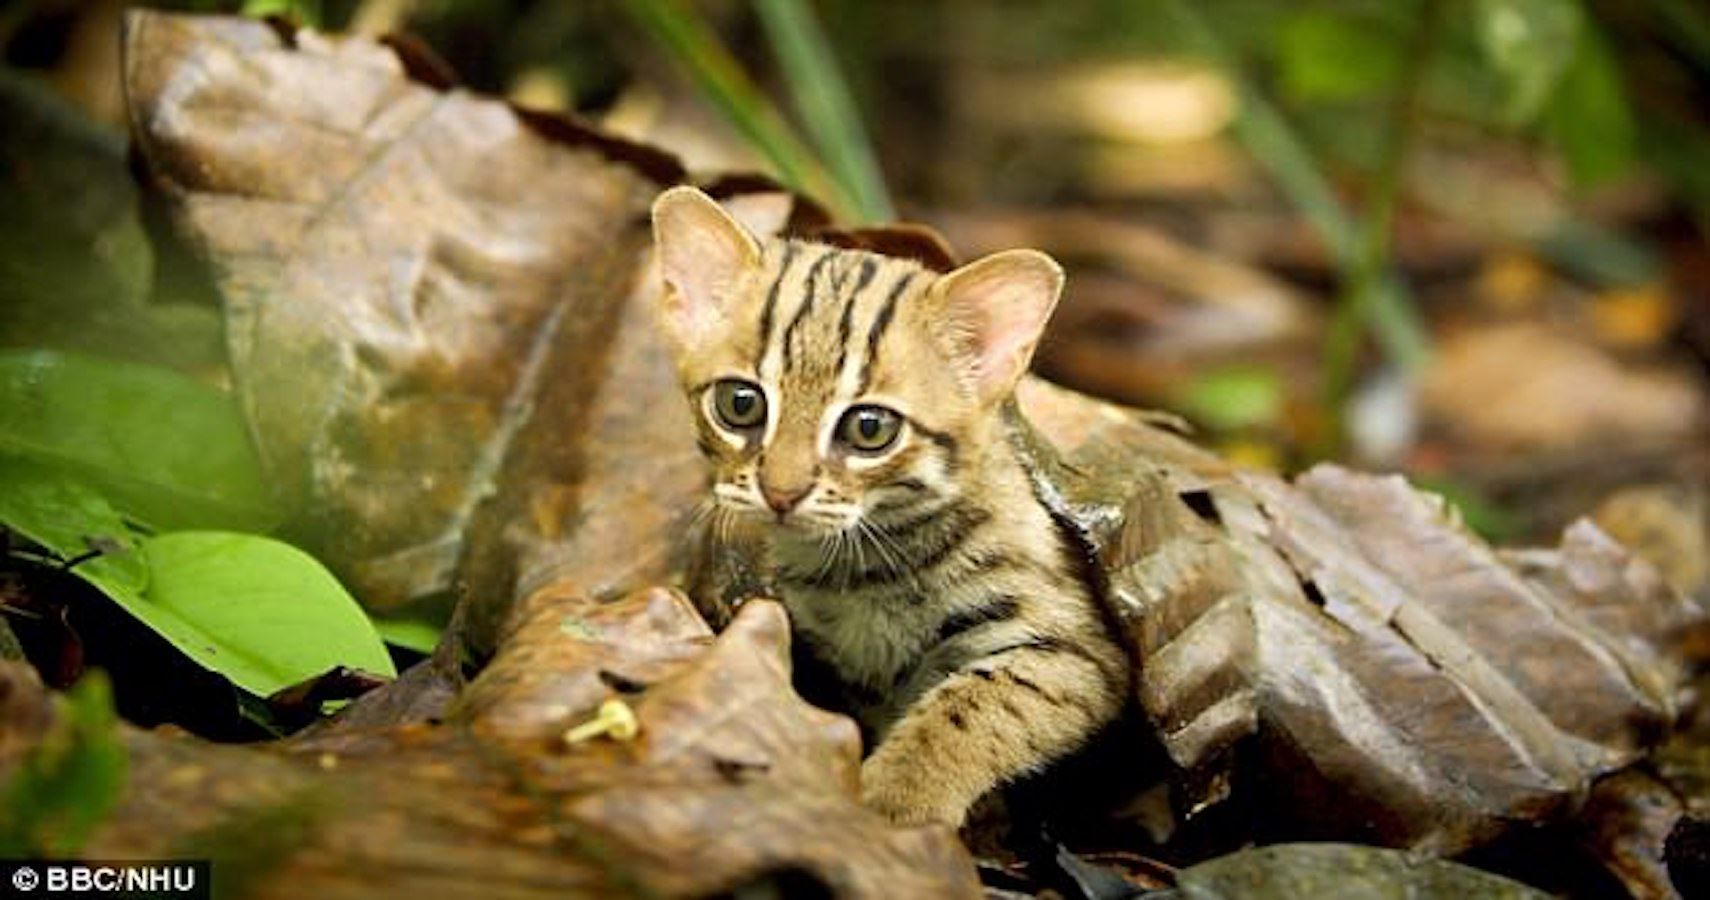 World's Tiniest Wildcat Could Fit In The Palm Of Your Hand